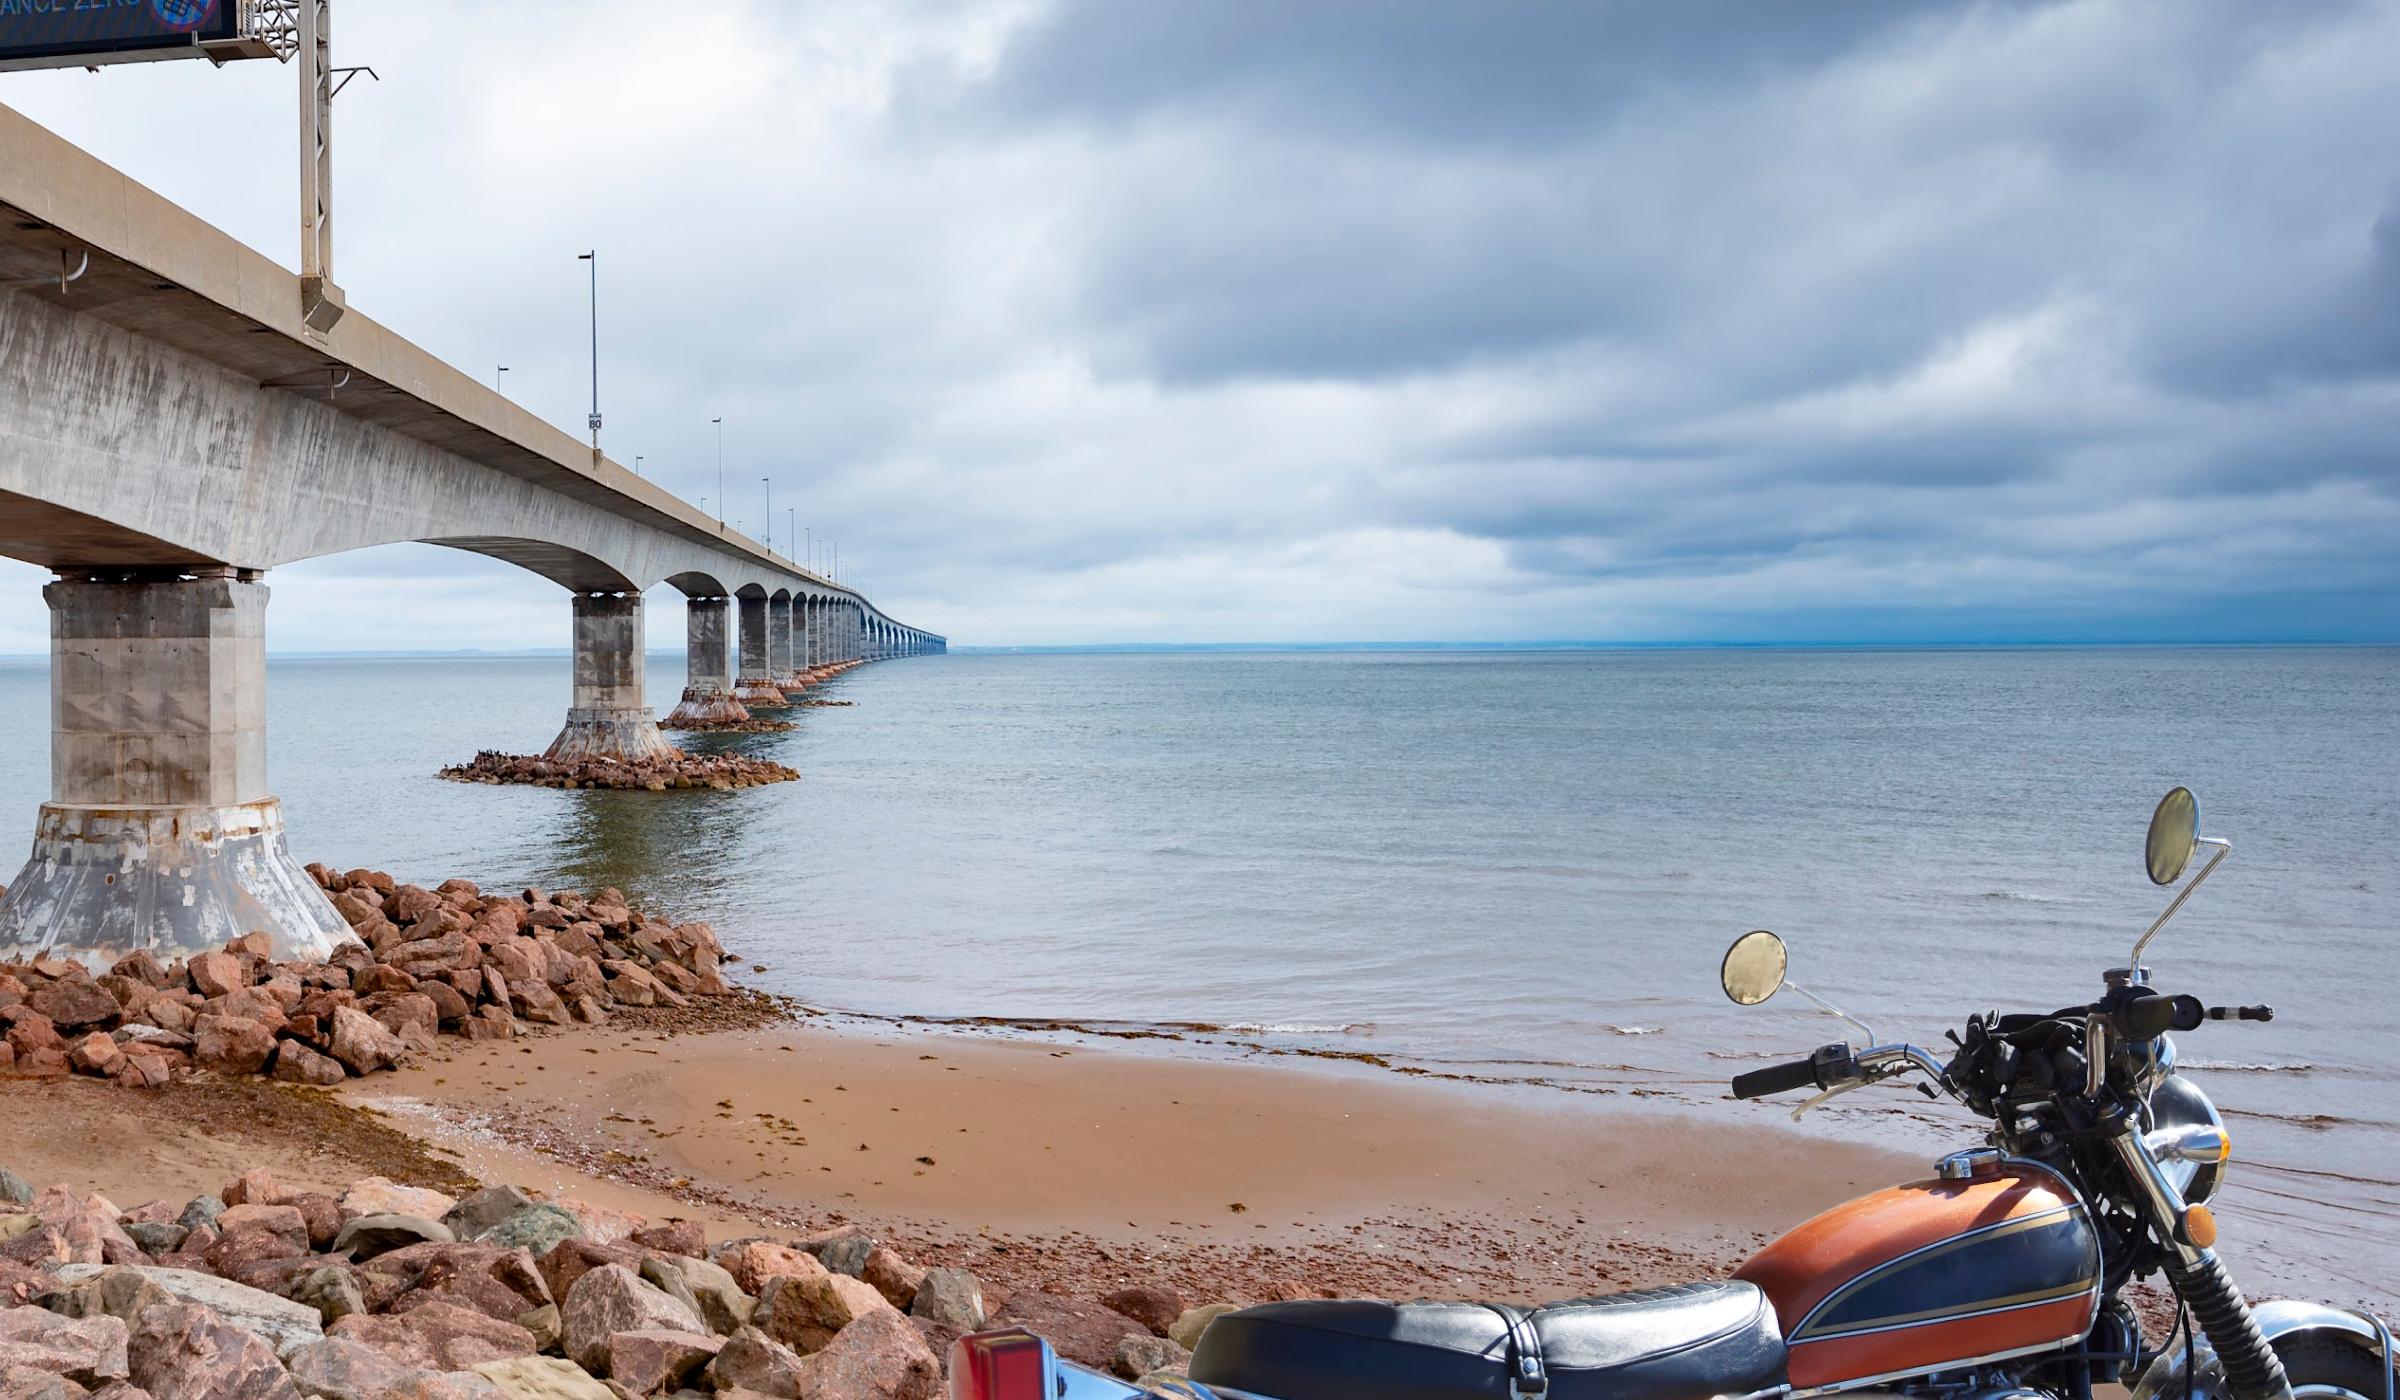 A motorcyle stands on the shore near the Confederation Bridge which spans the distance between New Brunswick and Prince Edward Island, Canada.